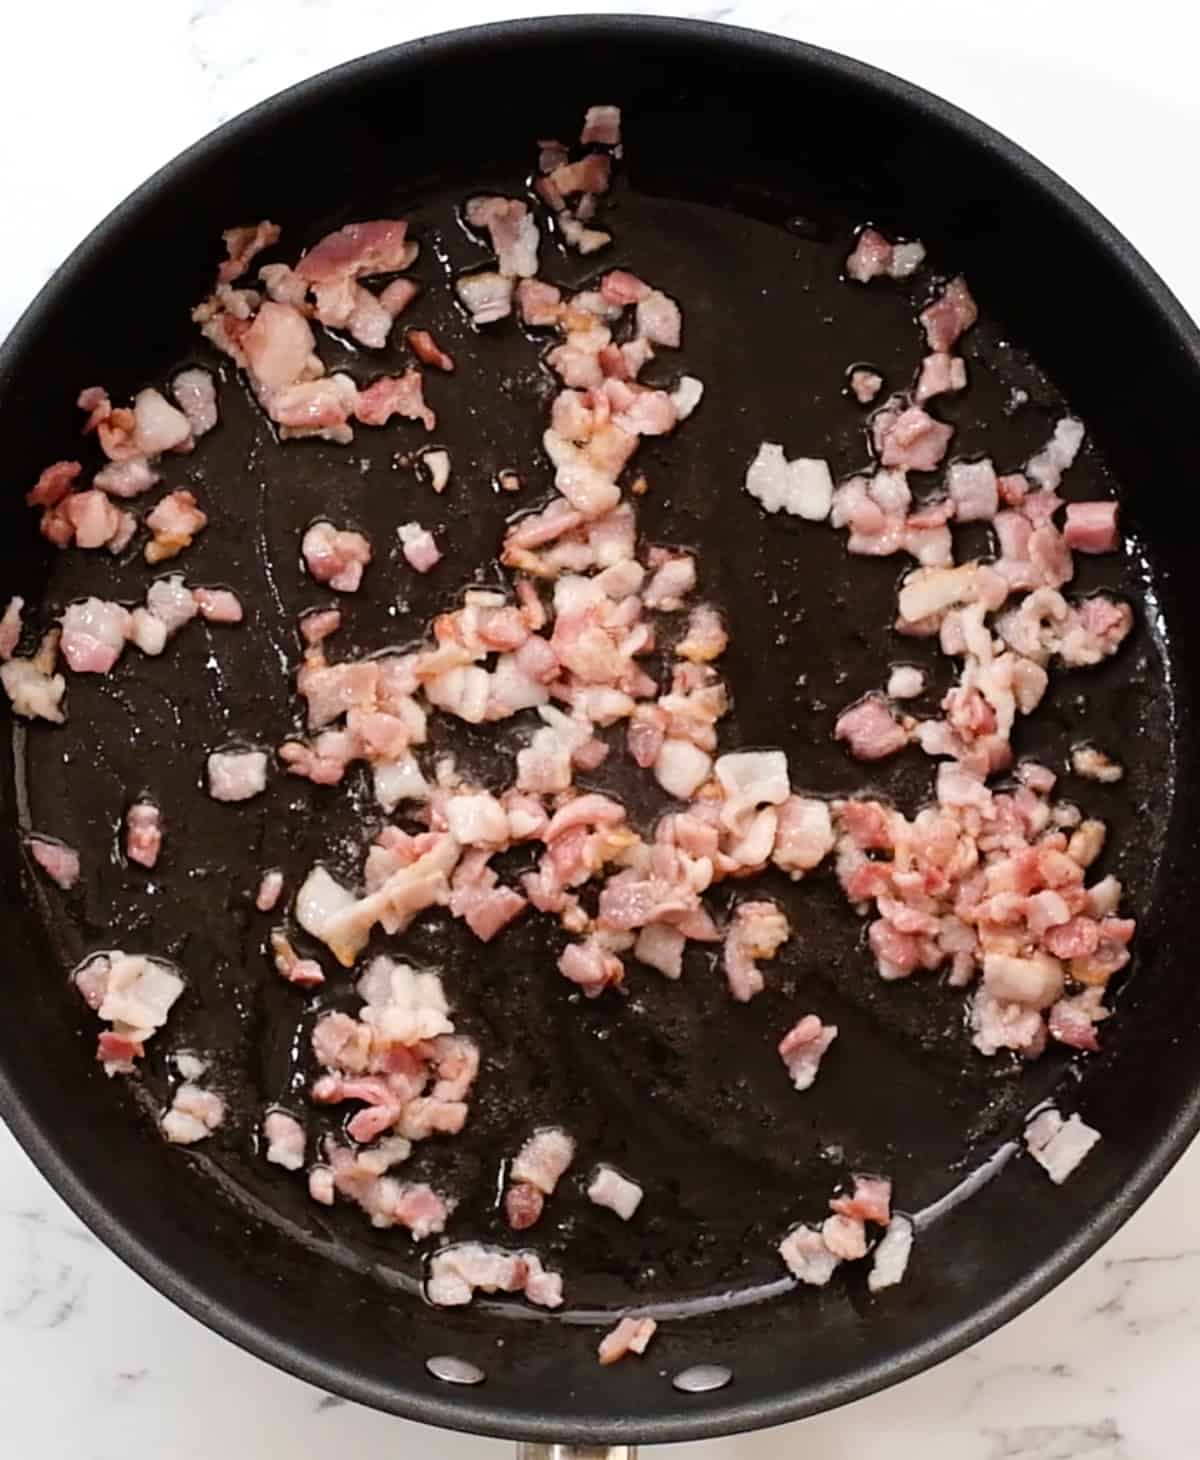 bacon in a fry pan after partially cooking